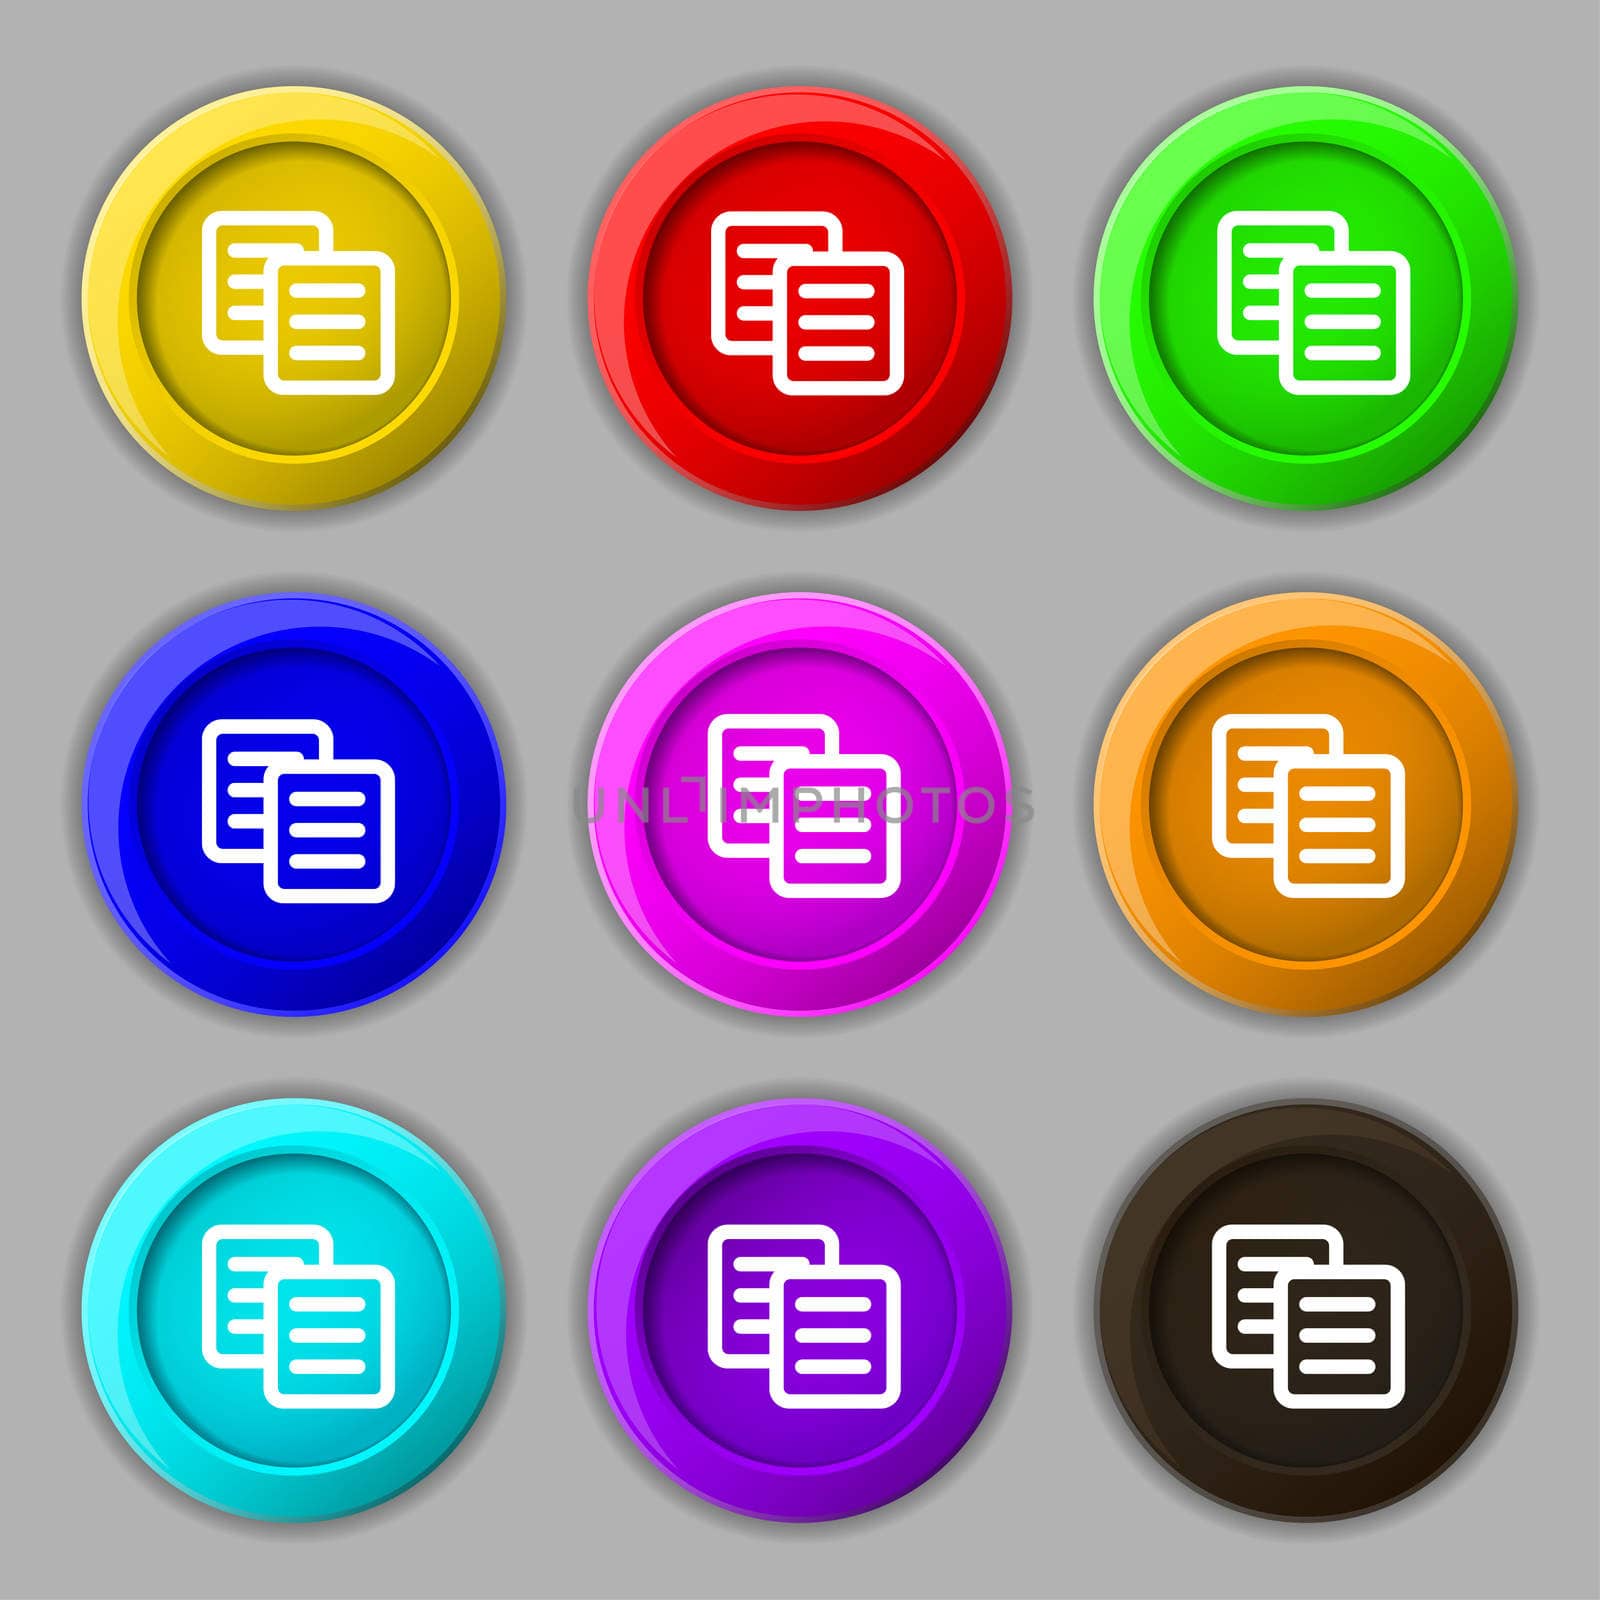 copy icon sign. symbol on nine round colourful buttons. illustration